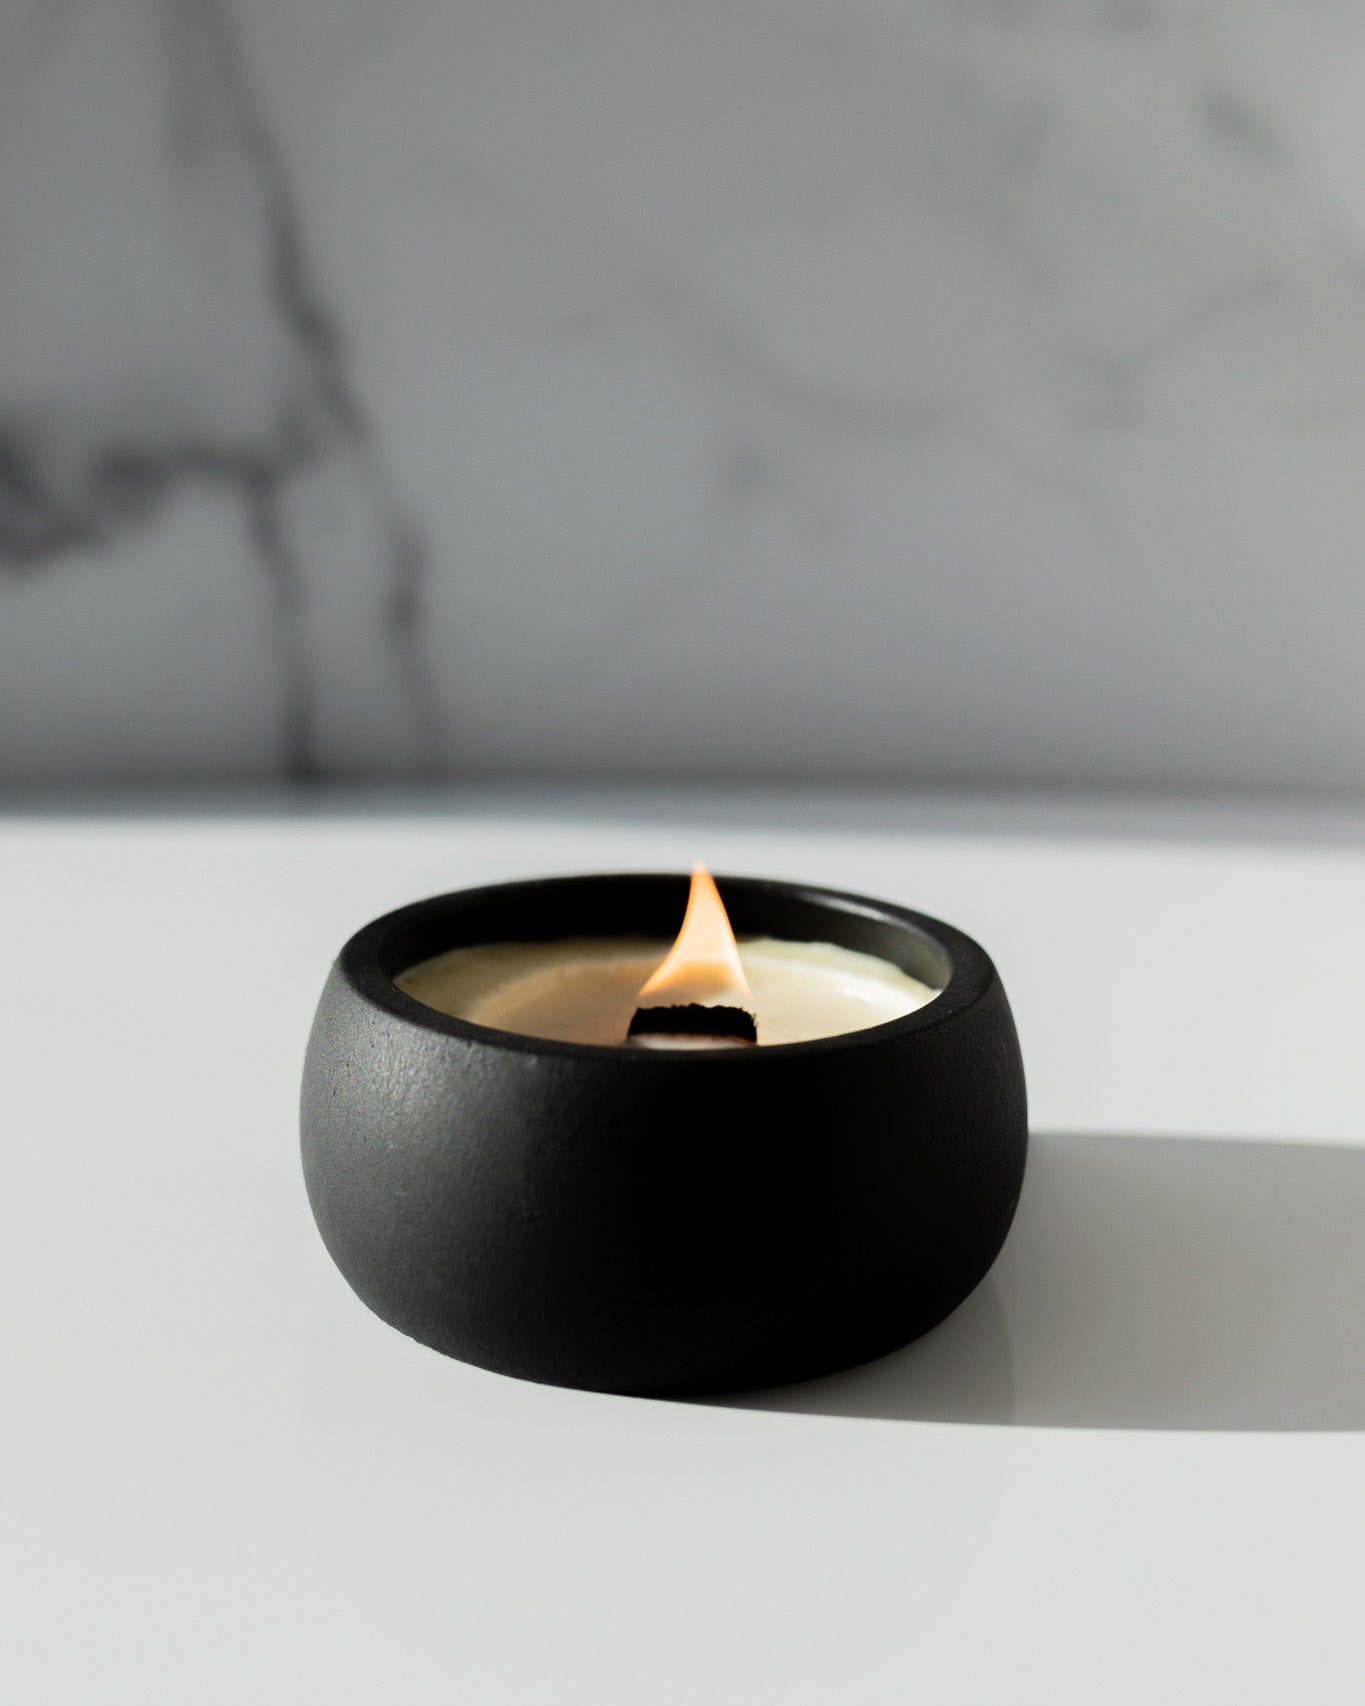 Live By The Sun Black Coconut Soy Candle - Black Concrete Wooden Wick Vessel